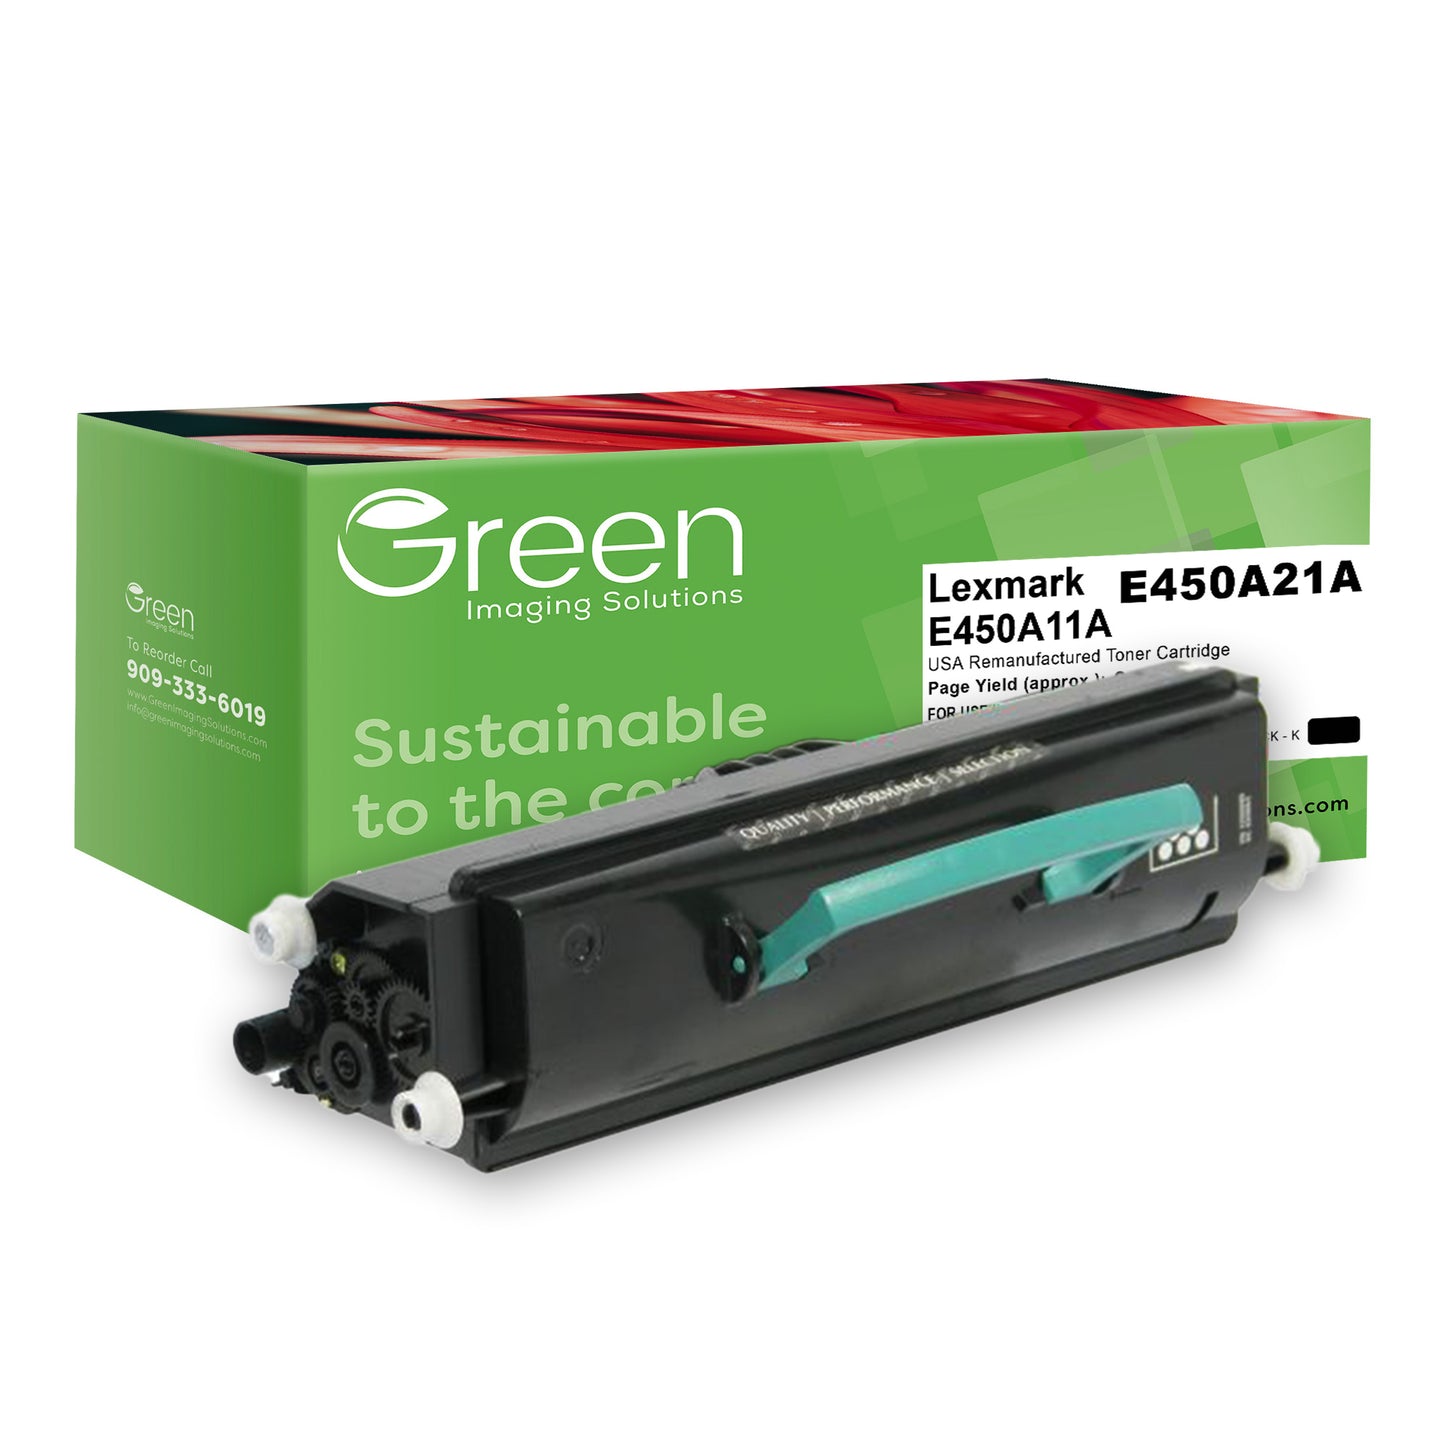 Green Imaging Solutions USA Remanufactured Toner Cartridge for Lexmark E450